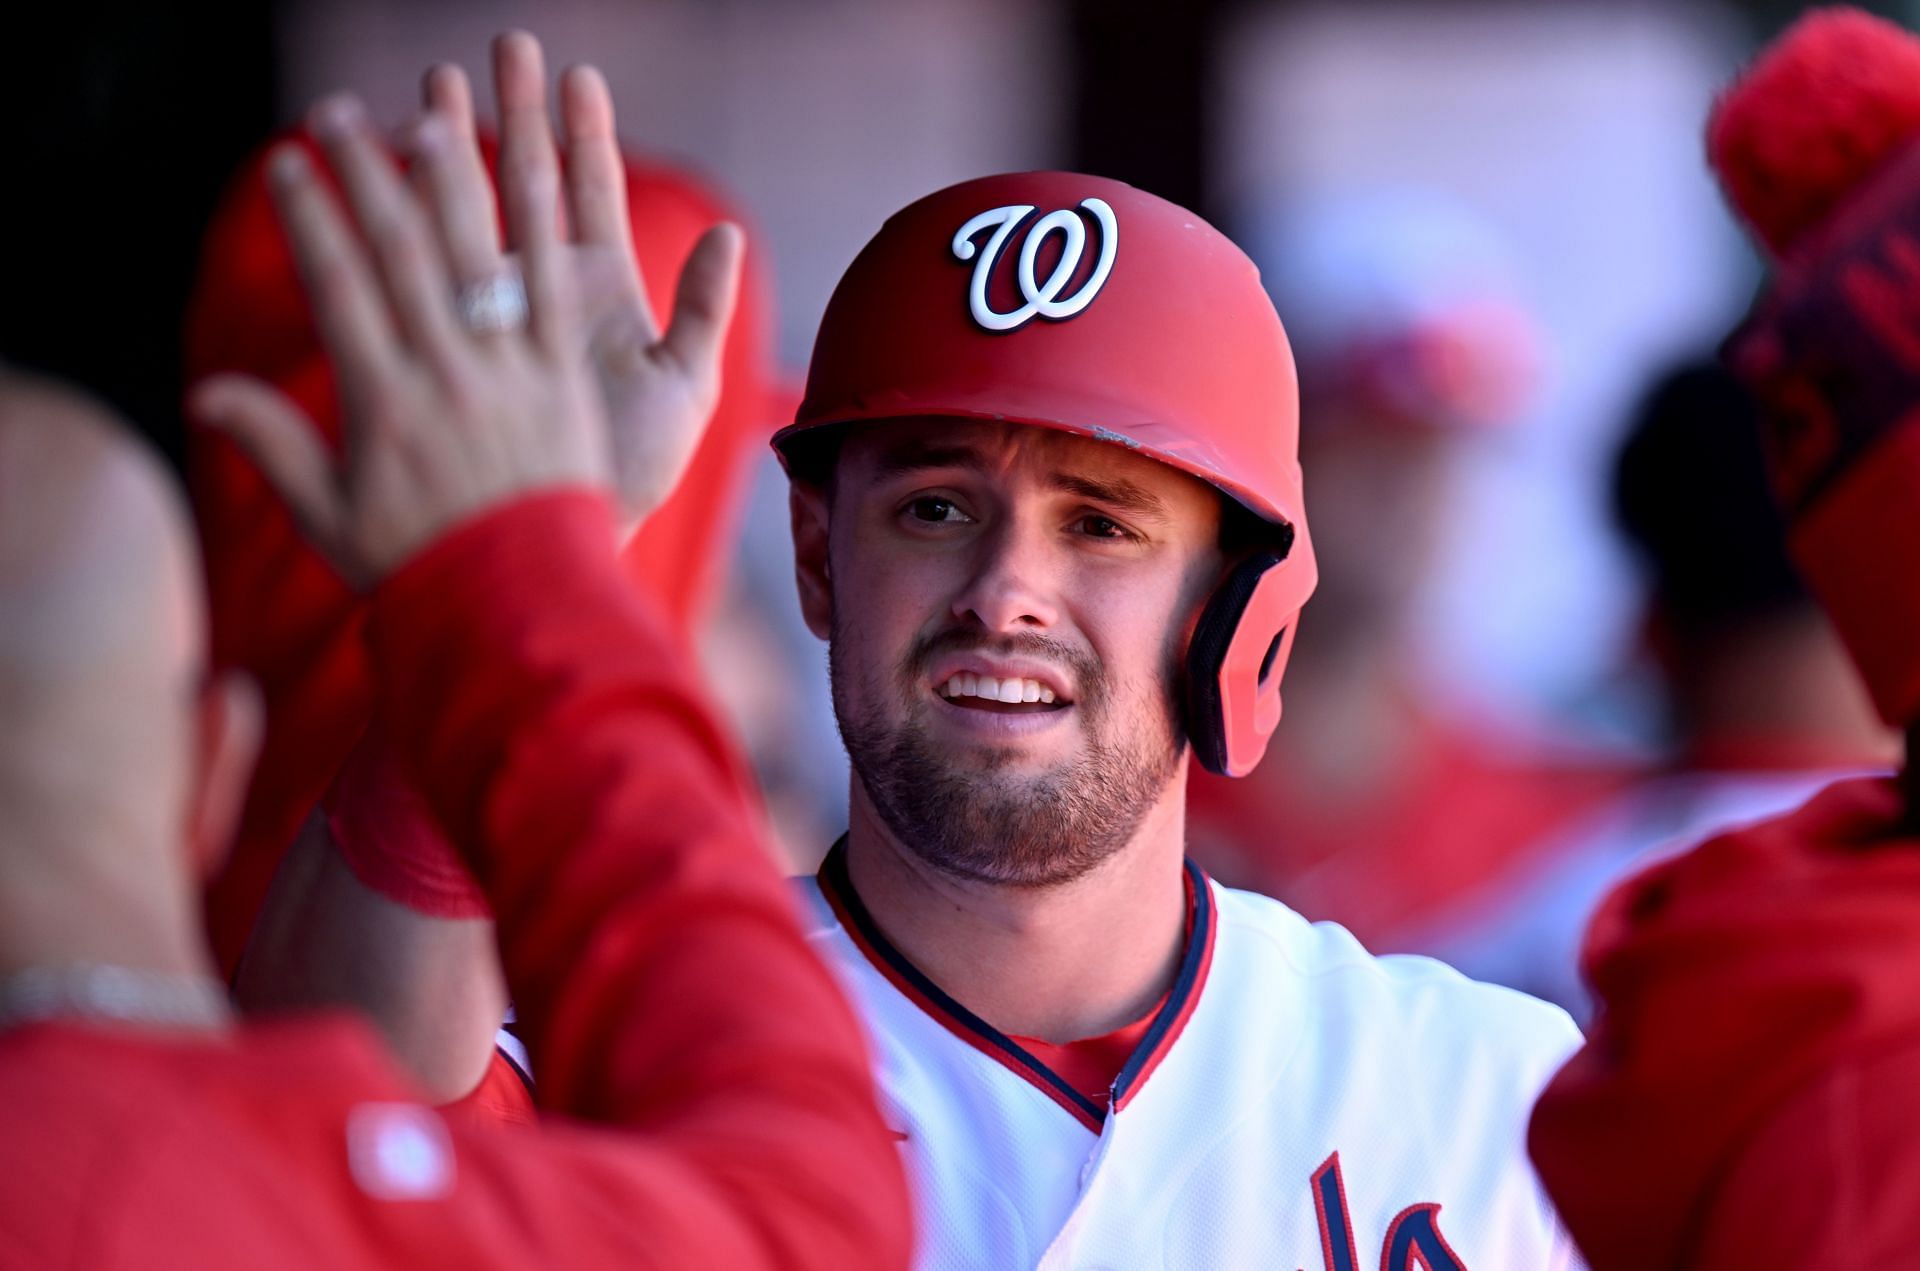 Homestand Highlights (April 7–10), by Nationals Communications